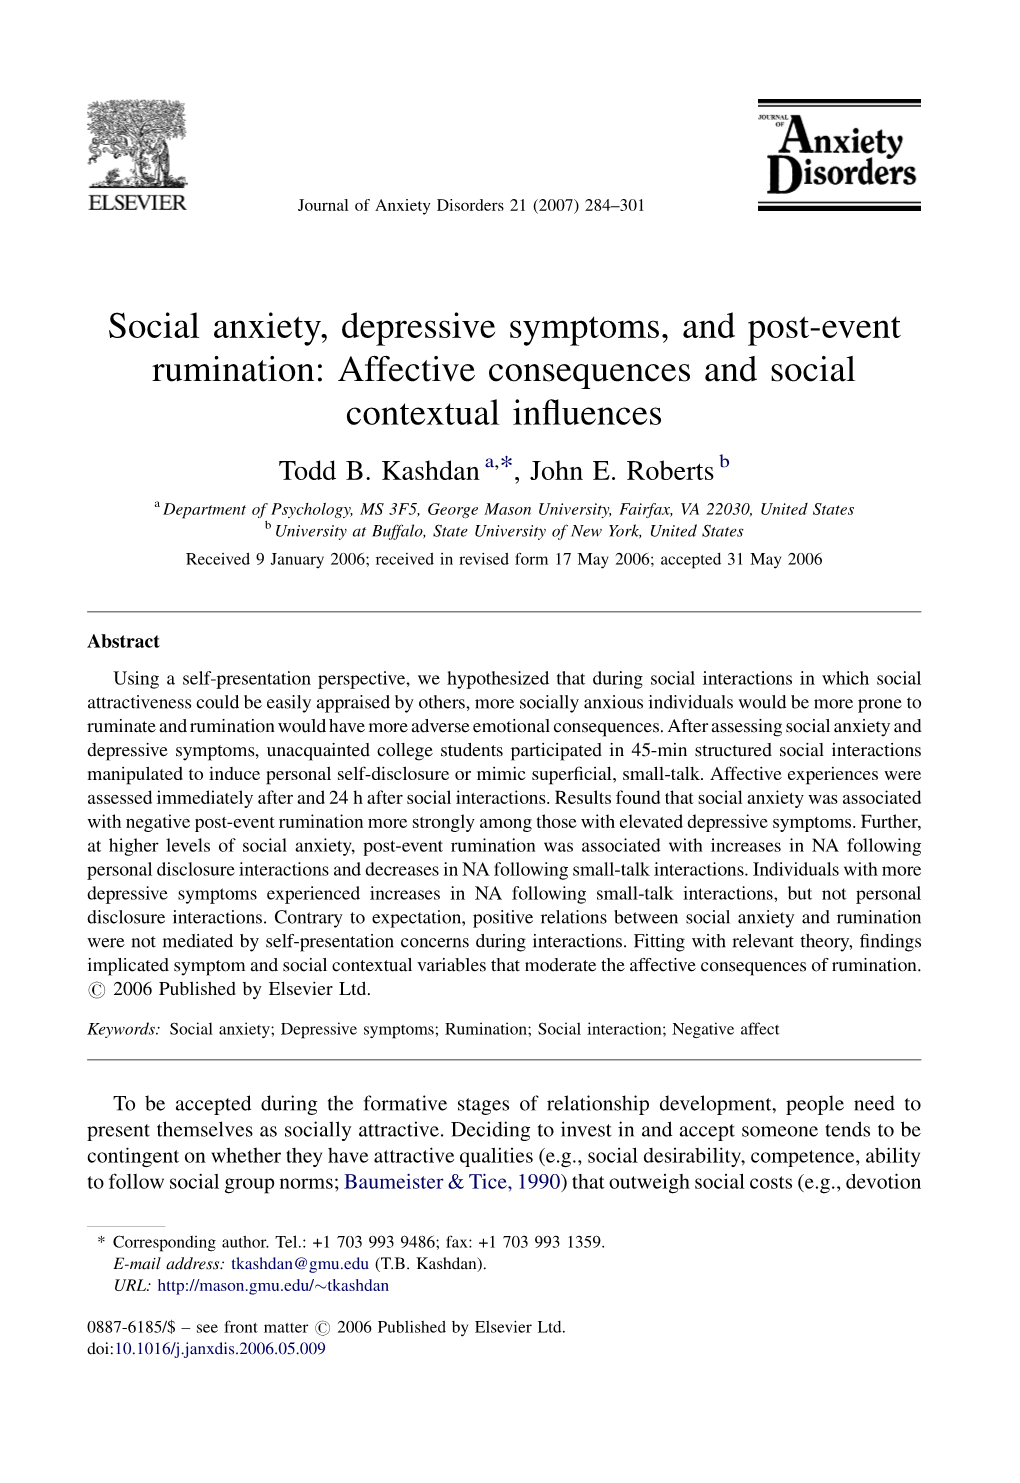 Social Anxiety, Depressive Symptoms, and Post-Event Rumination: Affective Consequences and Social Contextual Influences